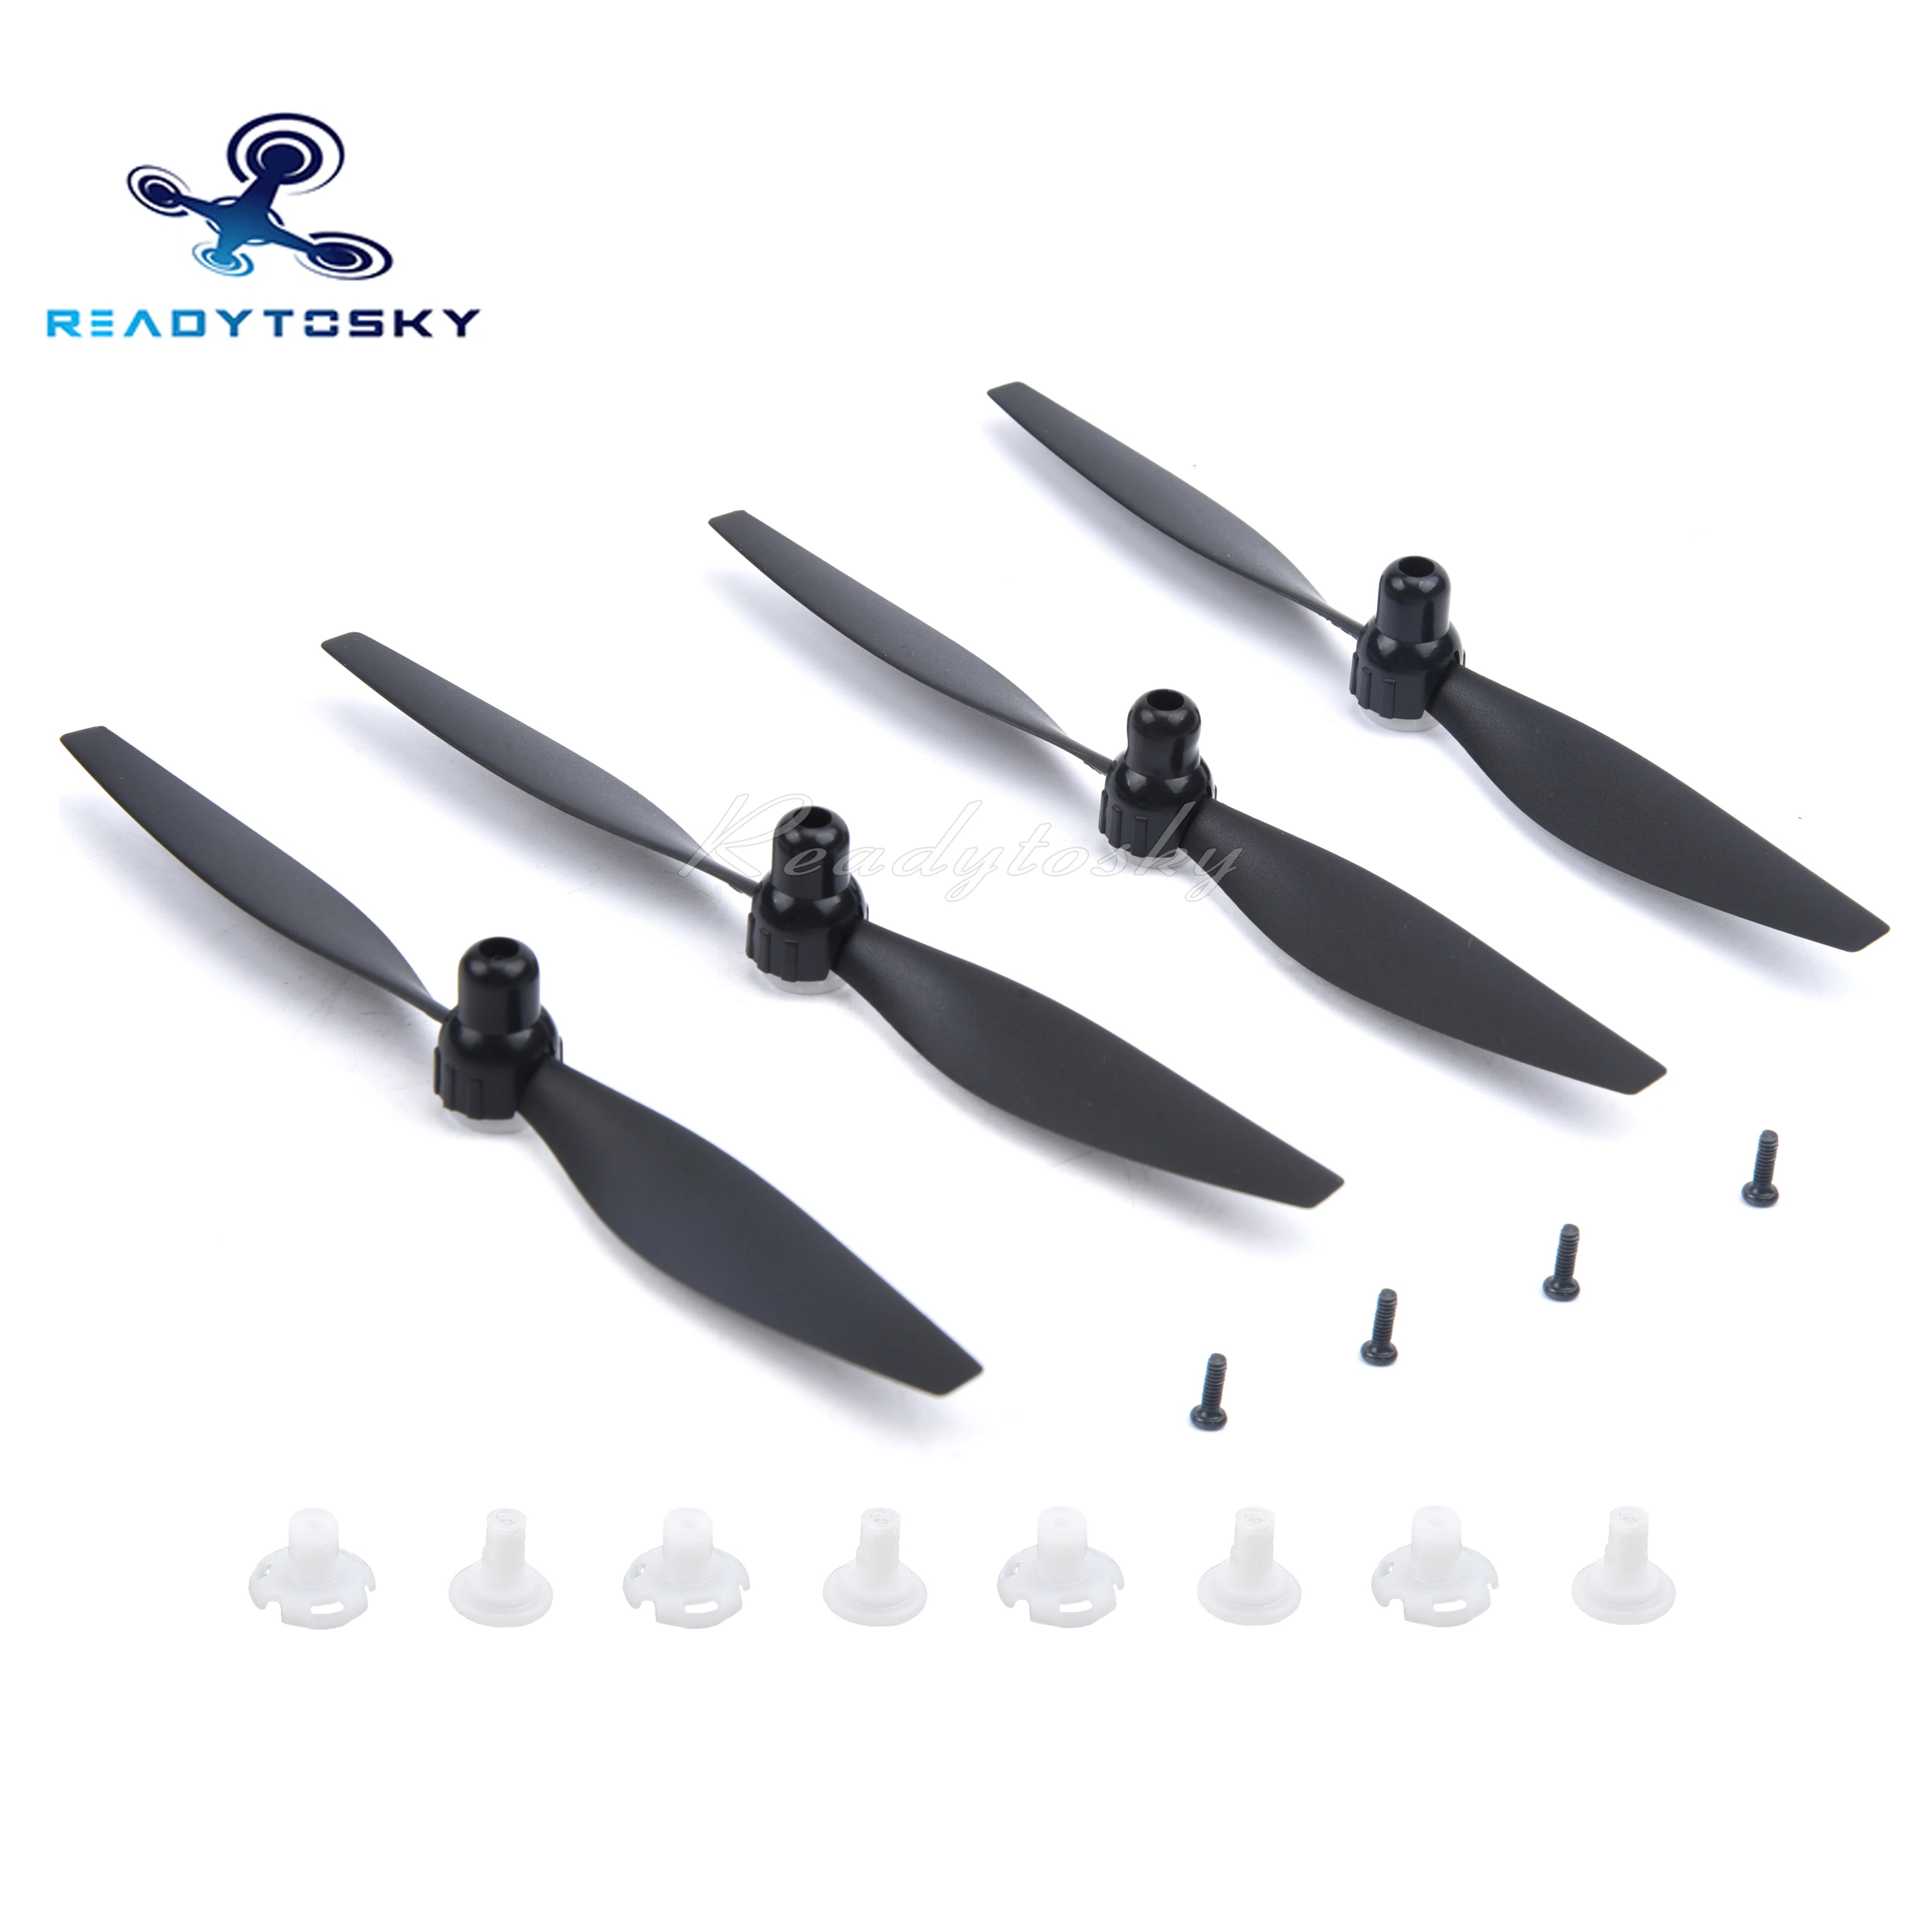 2/4PCs 5.2inch Propeller, 5.2inch Propeller And Prop Saver Set SPECIFICATIONS Use :